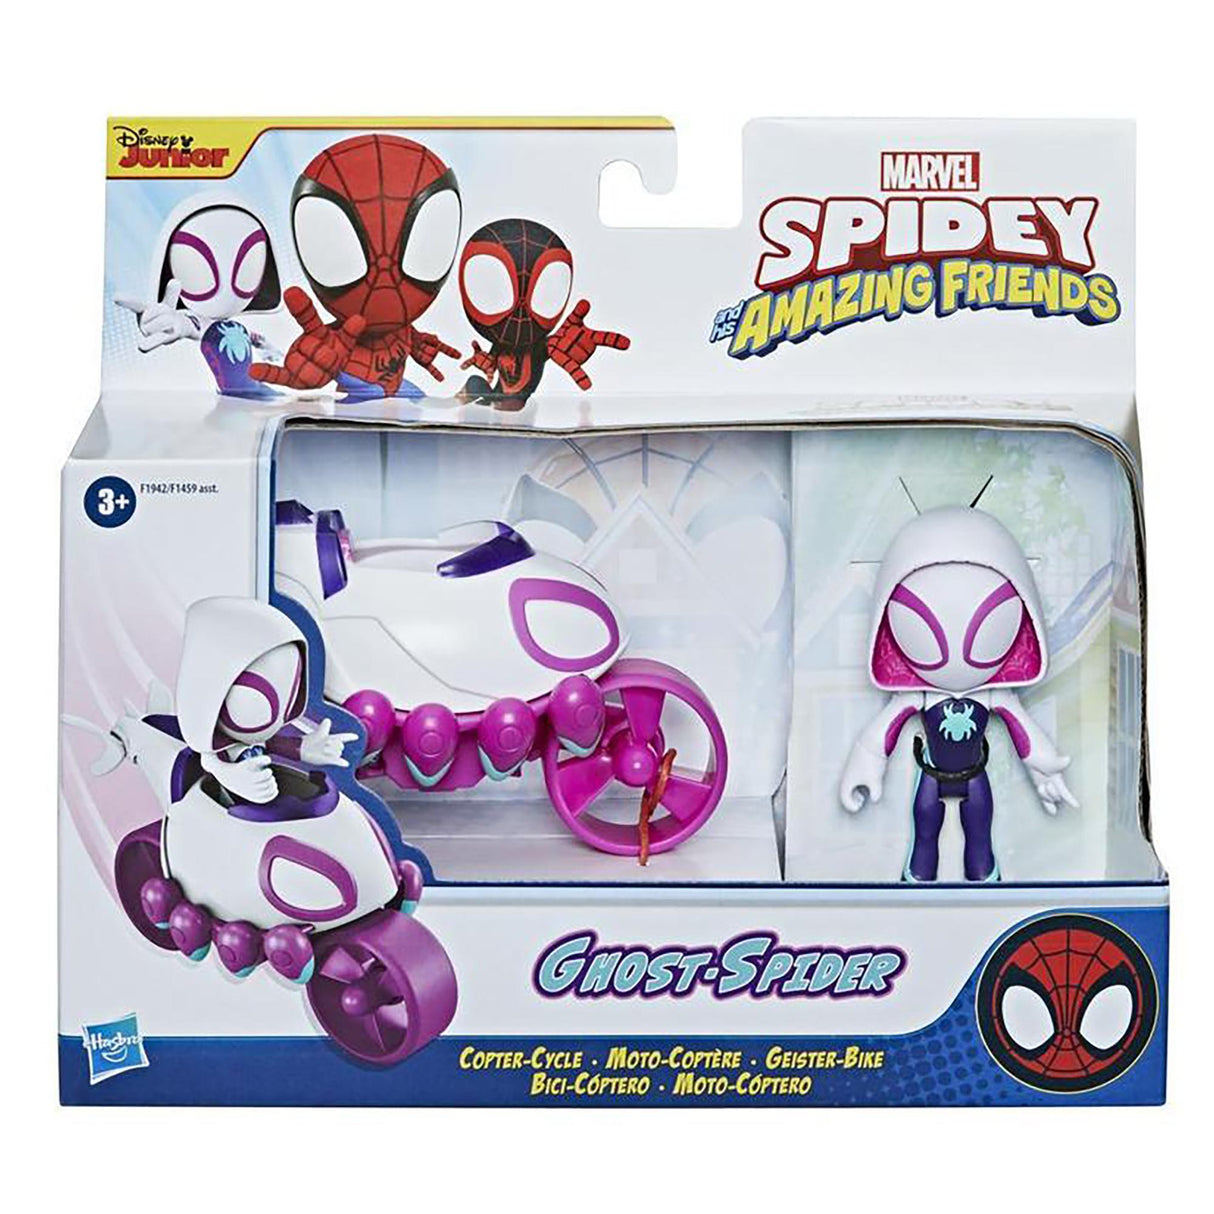 Marvel Spidey and His Amazing Friends Ghost-Spider Action Figure and Copter-Cycle Vehicle